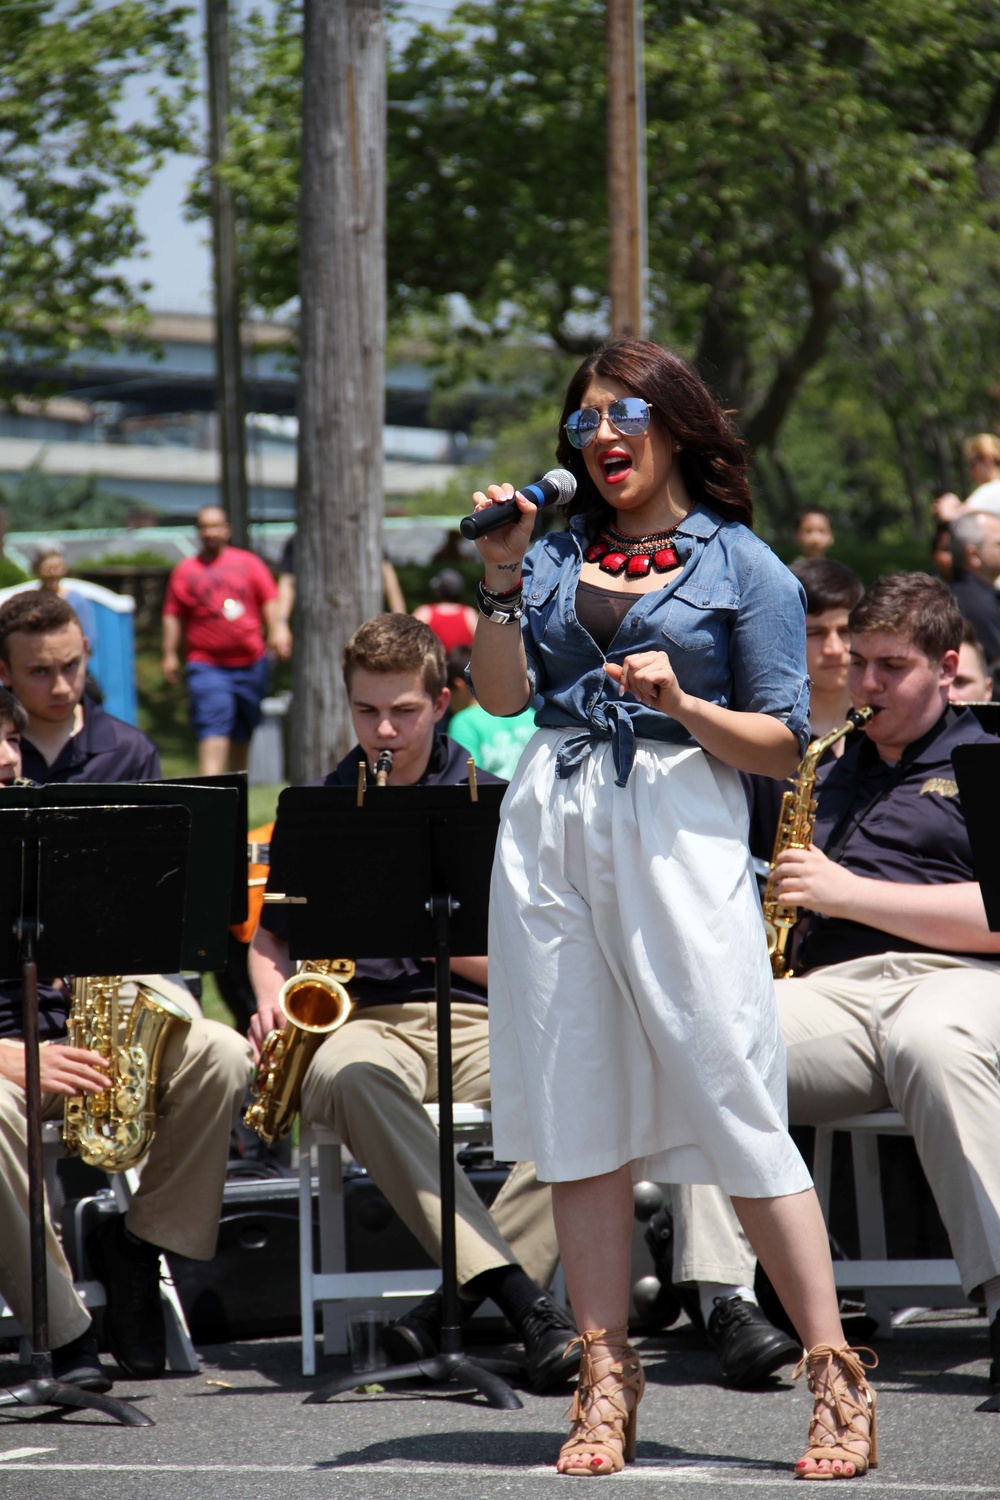 Melissa Fiore performs for Fleet Week Ship Parade crowd